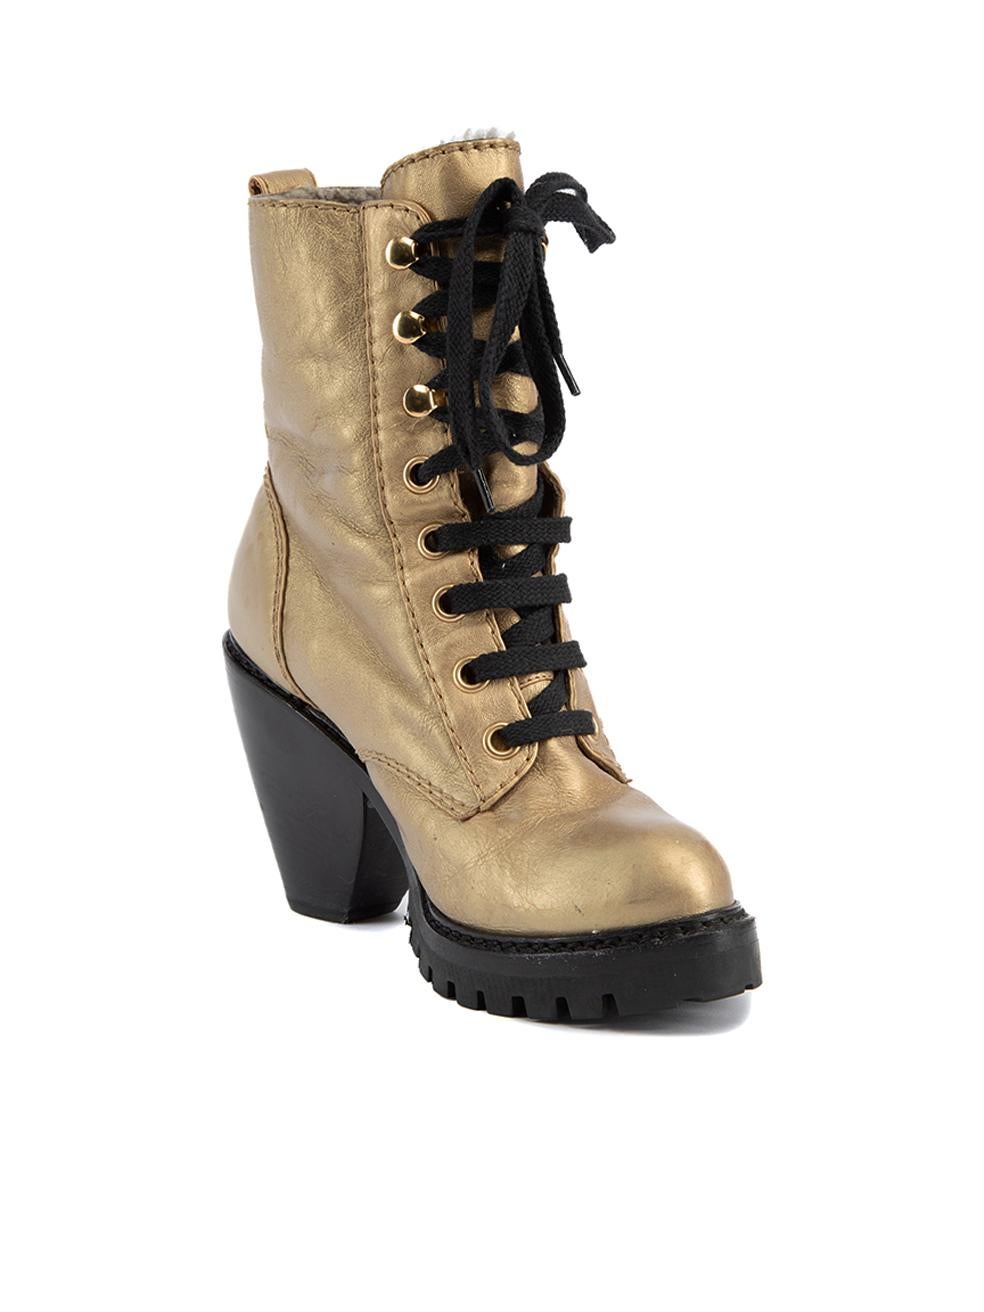 CONDITION is Very good. Hardly any wear to heels is evident. Some watermarks can be seen to leather aterial on heels and there is creasing the leather material on this used Marc Jacobs designer resale item. Details Gold Leather Lace up boots